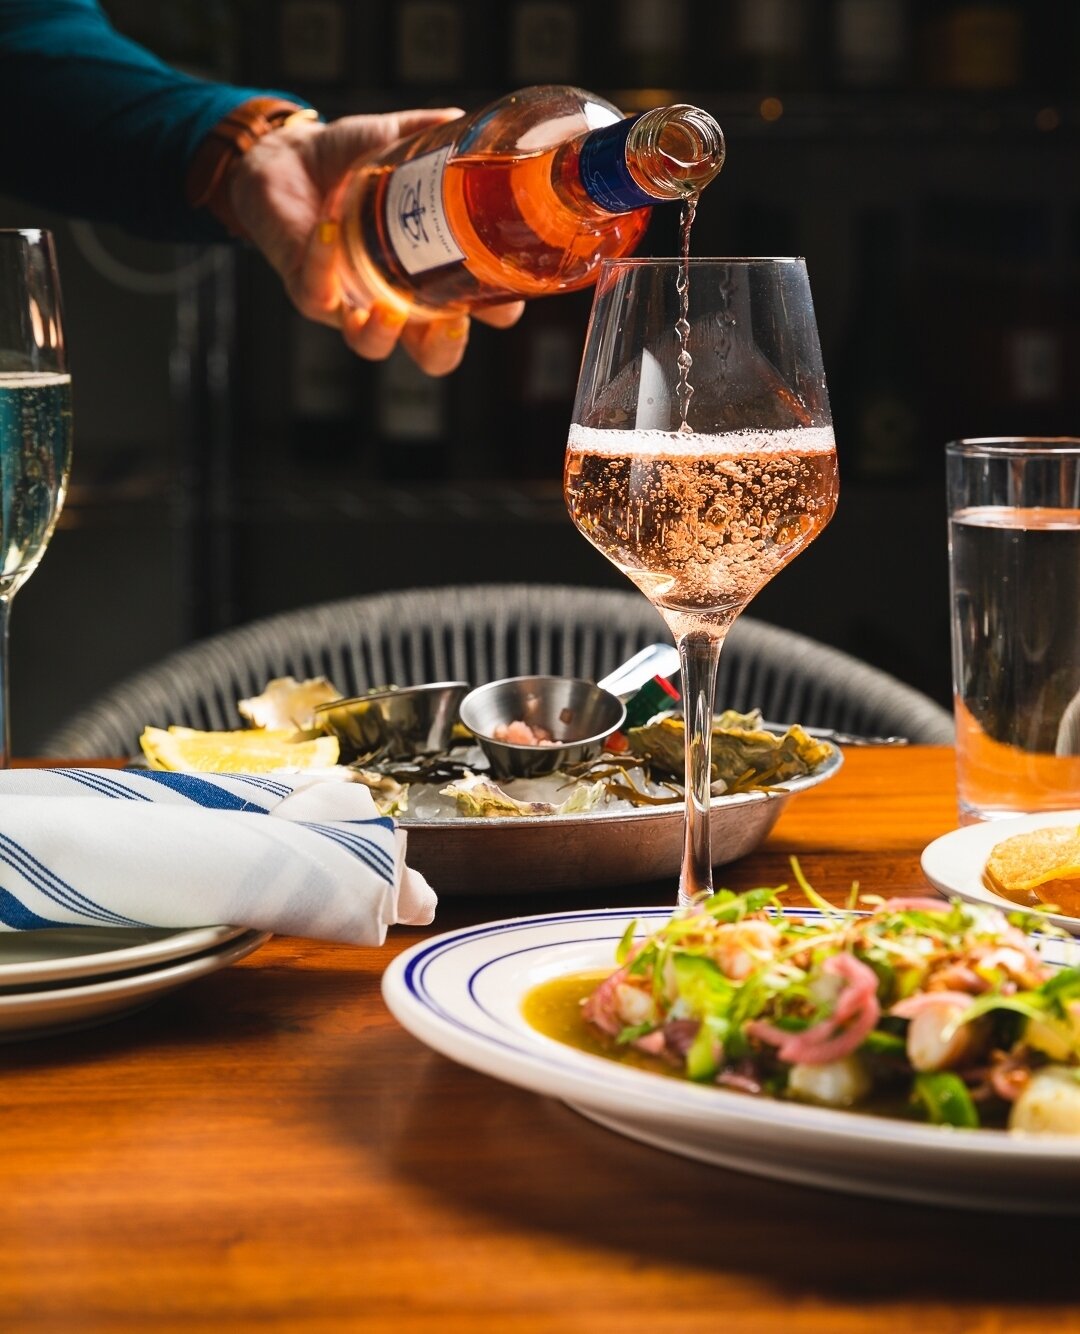 No need to BYOB. Our curated specialty shop includes a selection of fine wines that complement chef's dishes beautifully. ⁠
⁠
⁠
⁠
⁠
⁠
#joliecoronado #coronado #coronadoisland #visitcoronado #coronadospecialtyshop #coronadobutcher #coronadowine⁠